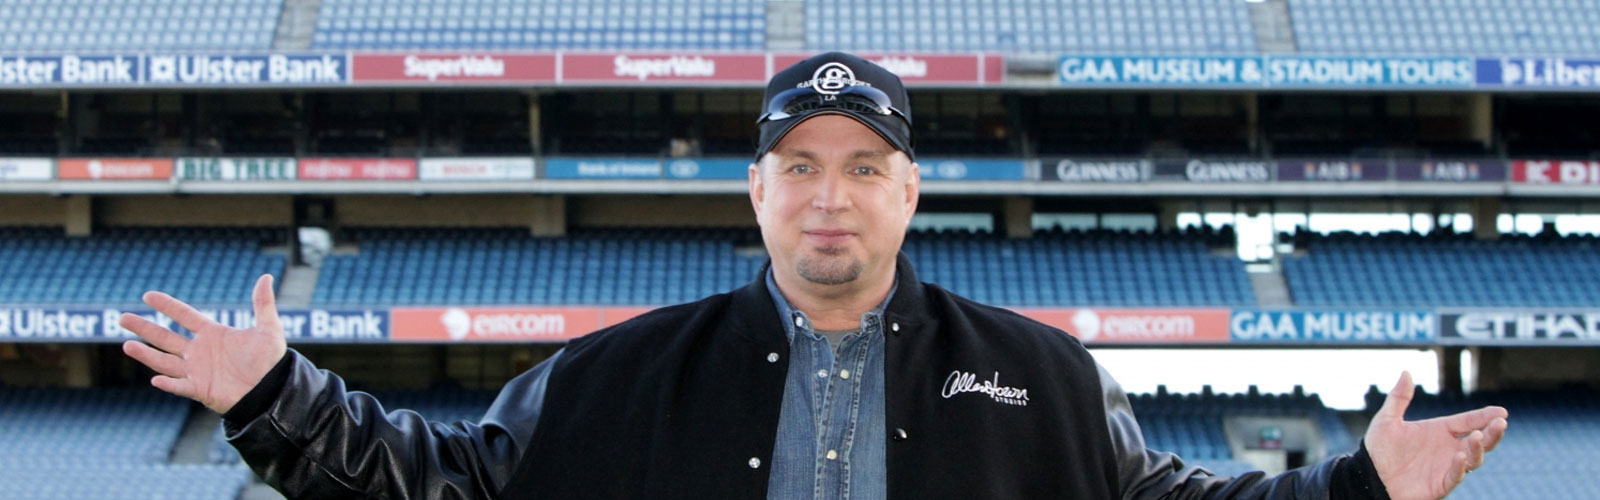 Win Two Tickets to Garth Brooks!